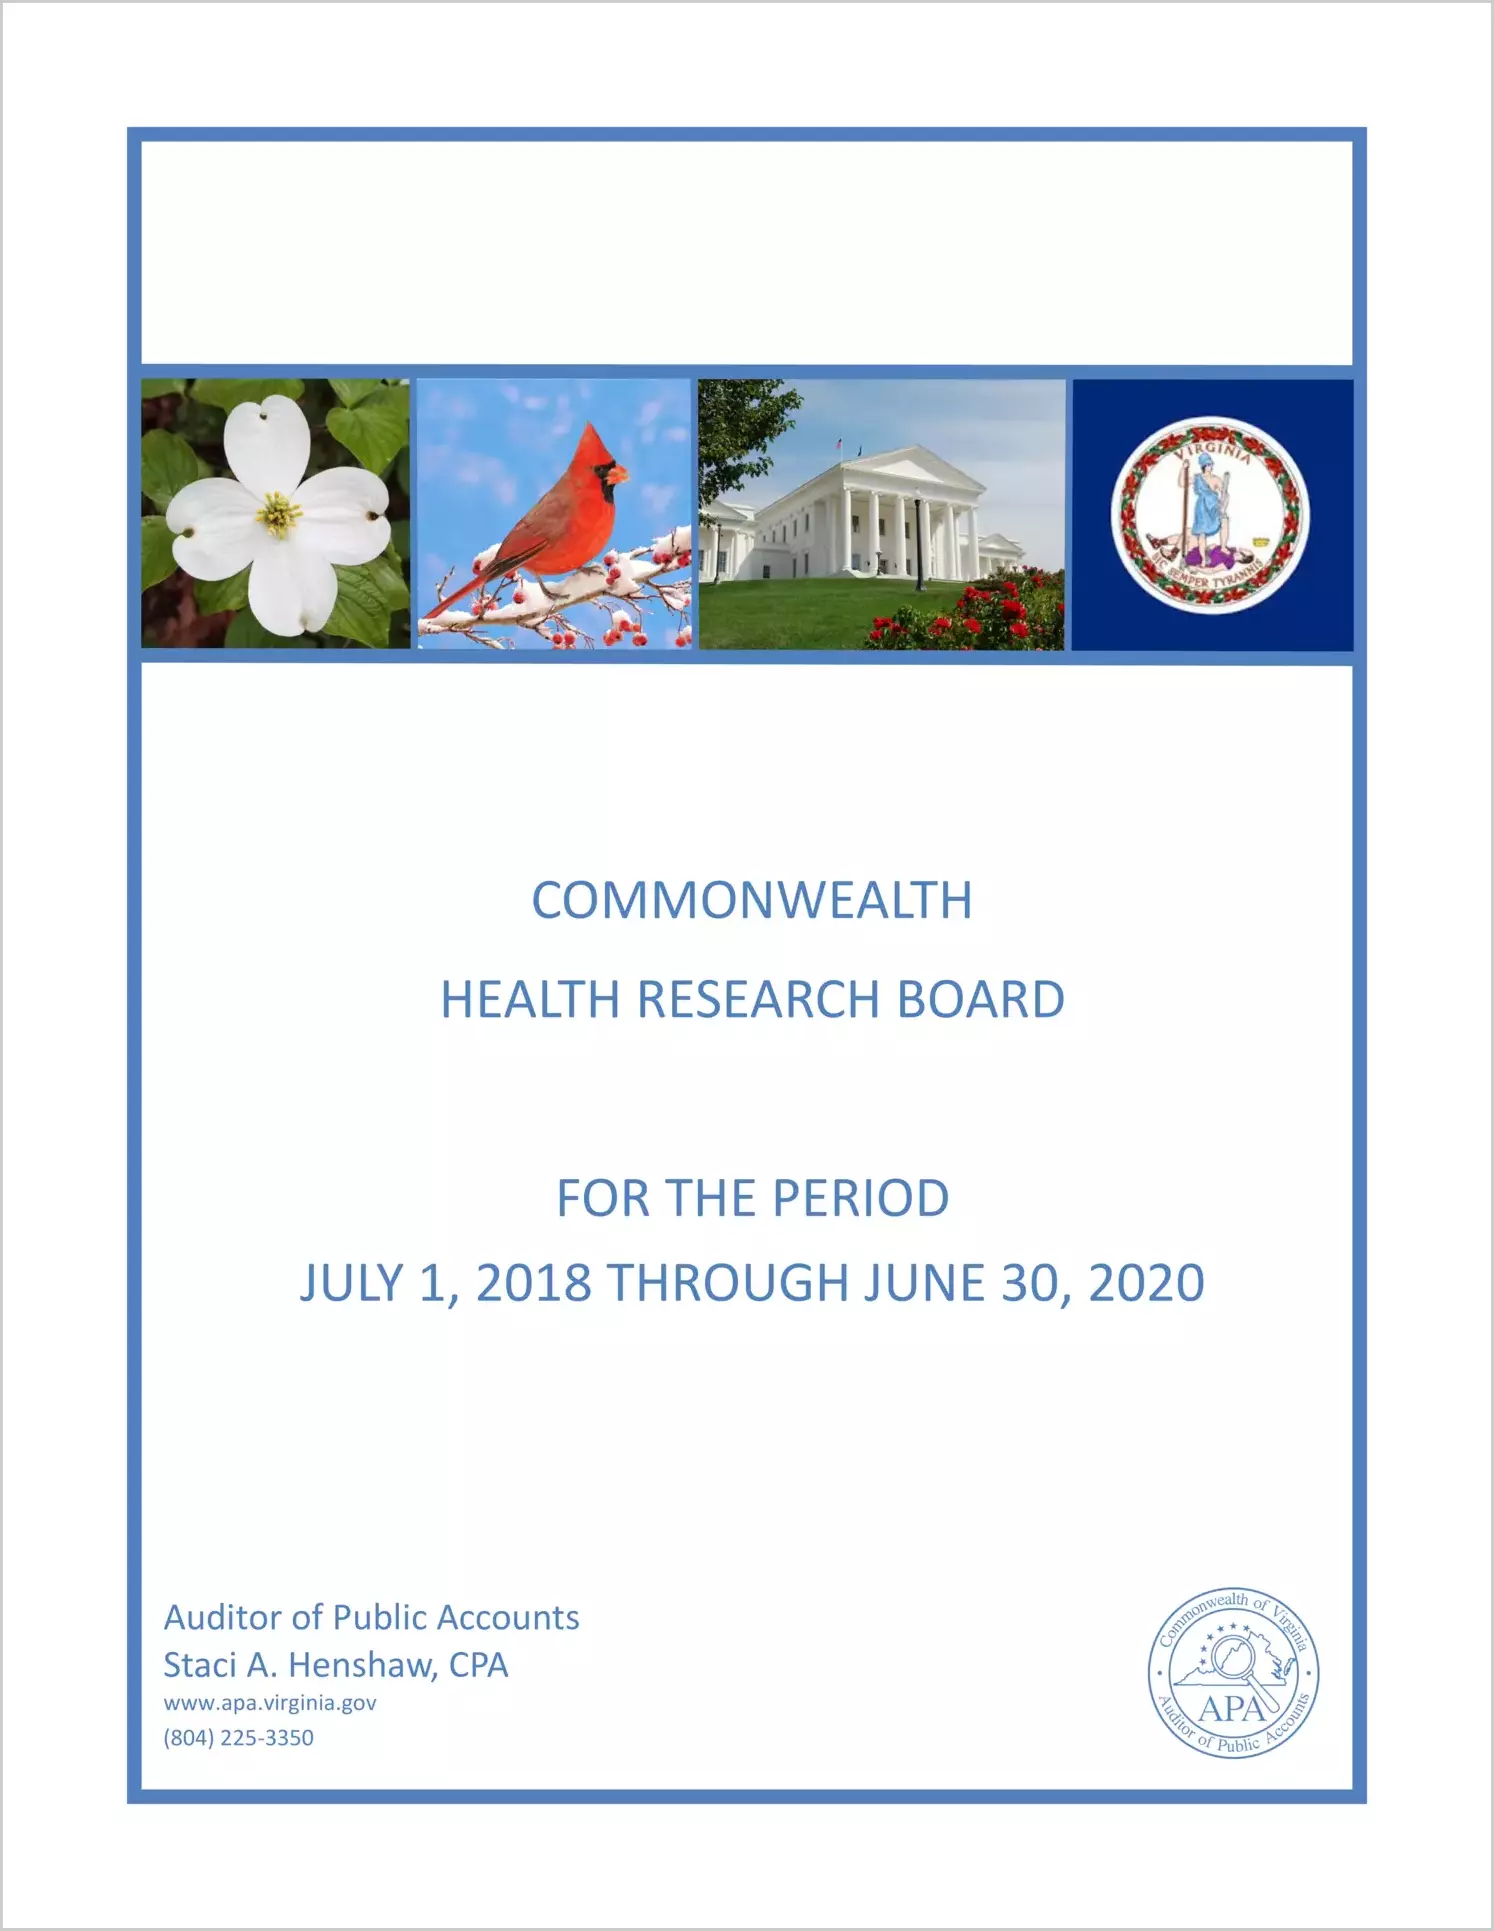 Commonwealth Health Research Board for the period July 1, 2018 through June 30, 2020